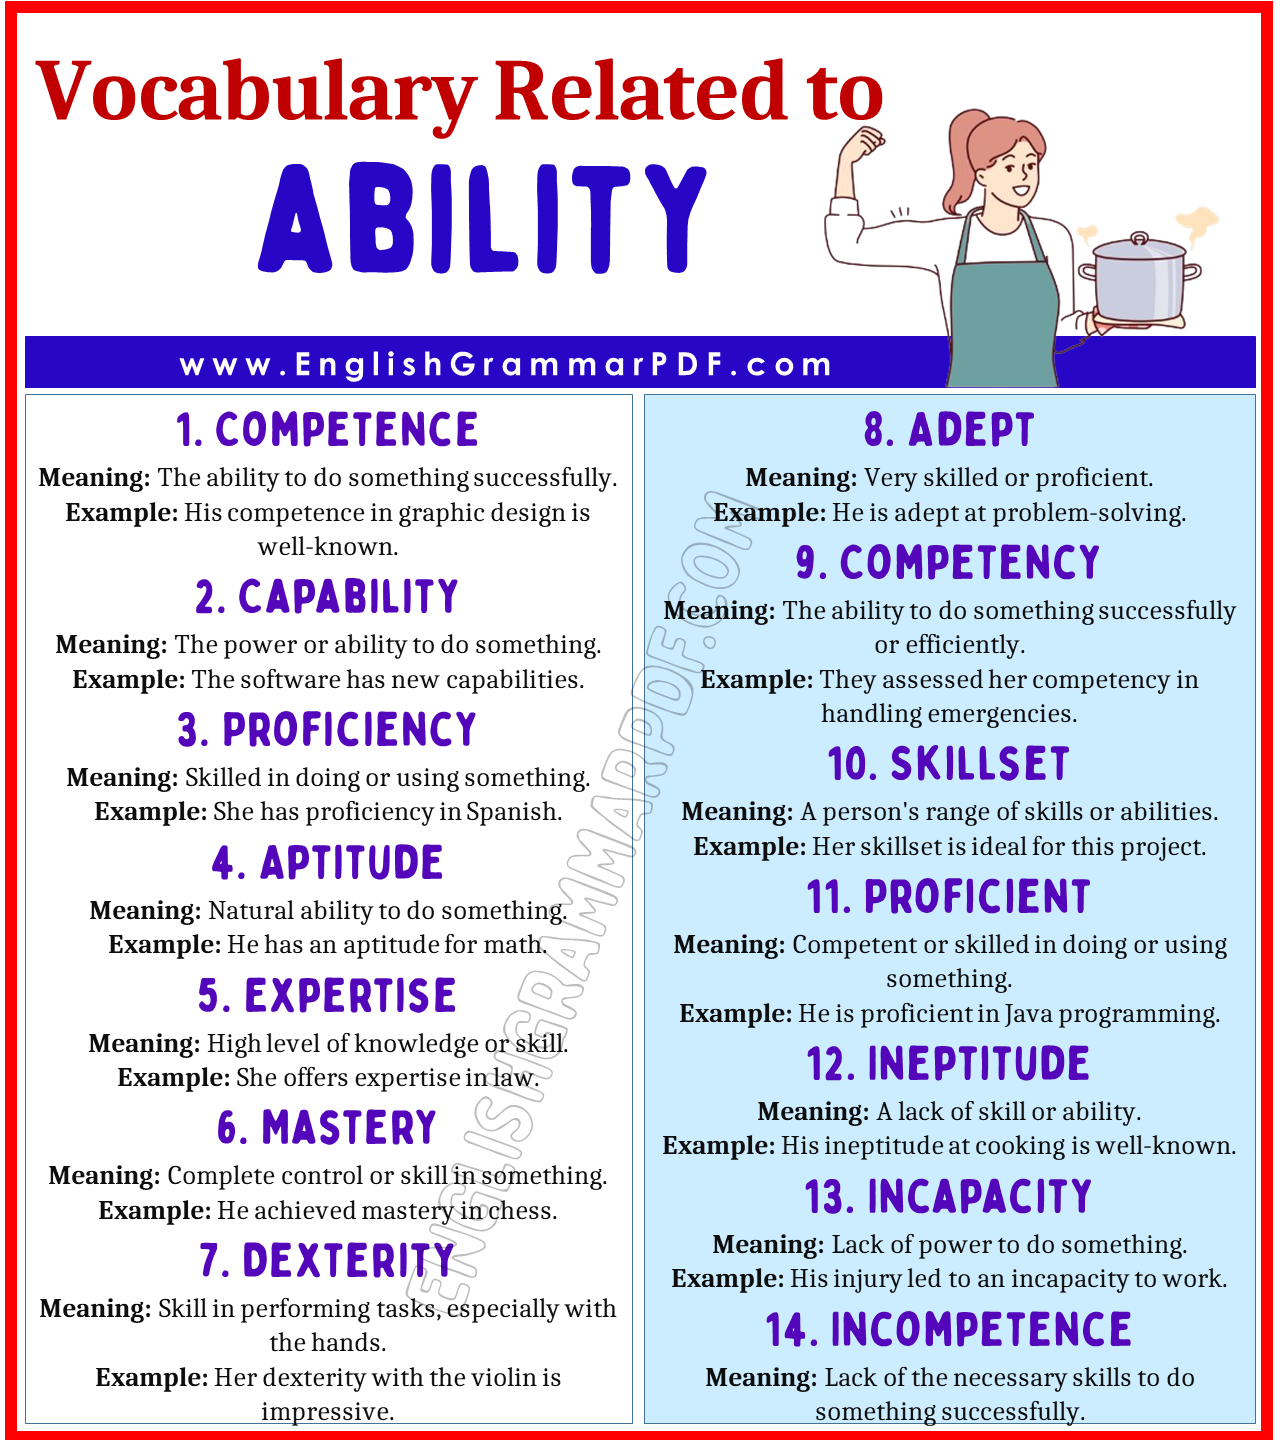 Vocabulary Words Related to Ability